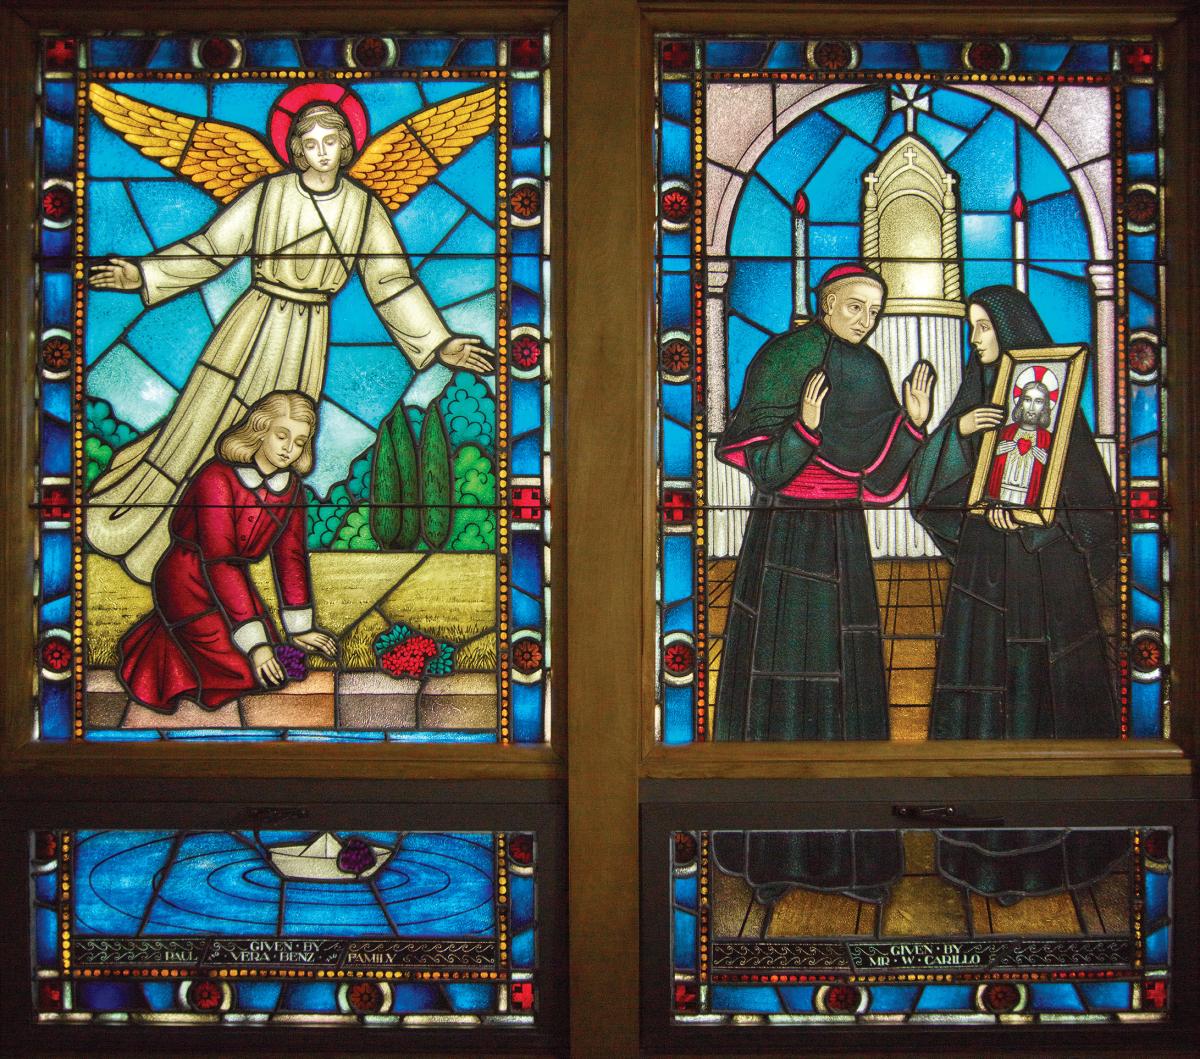 Stained glass window showing Cabrini 